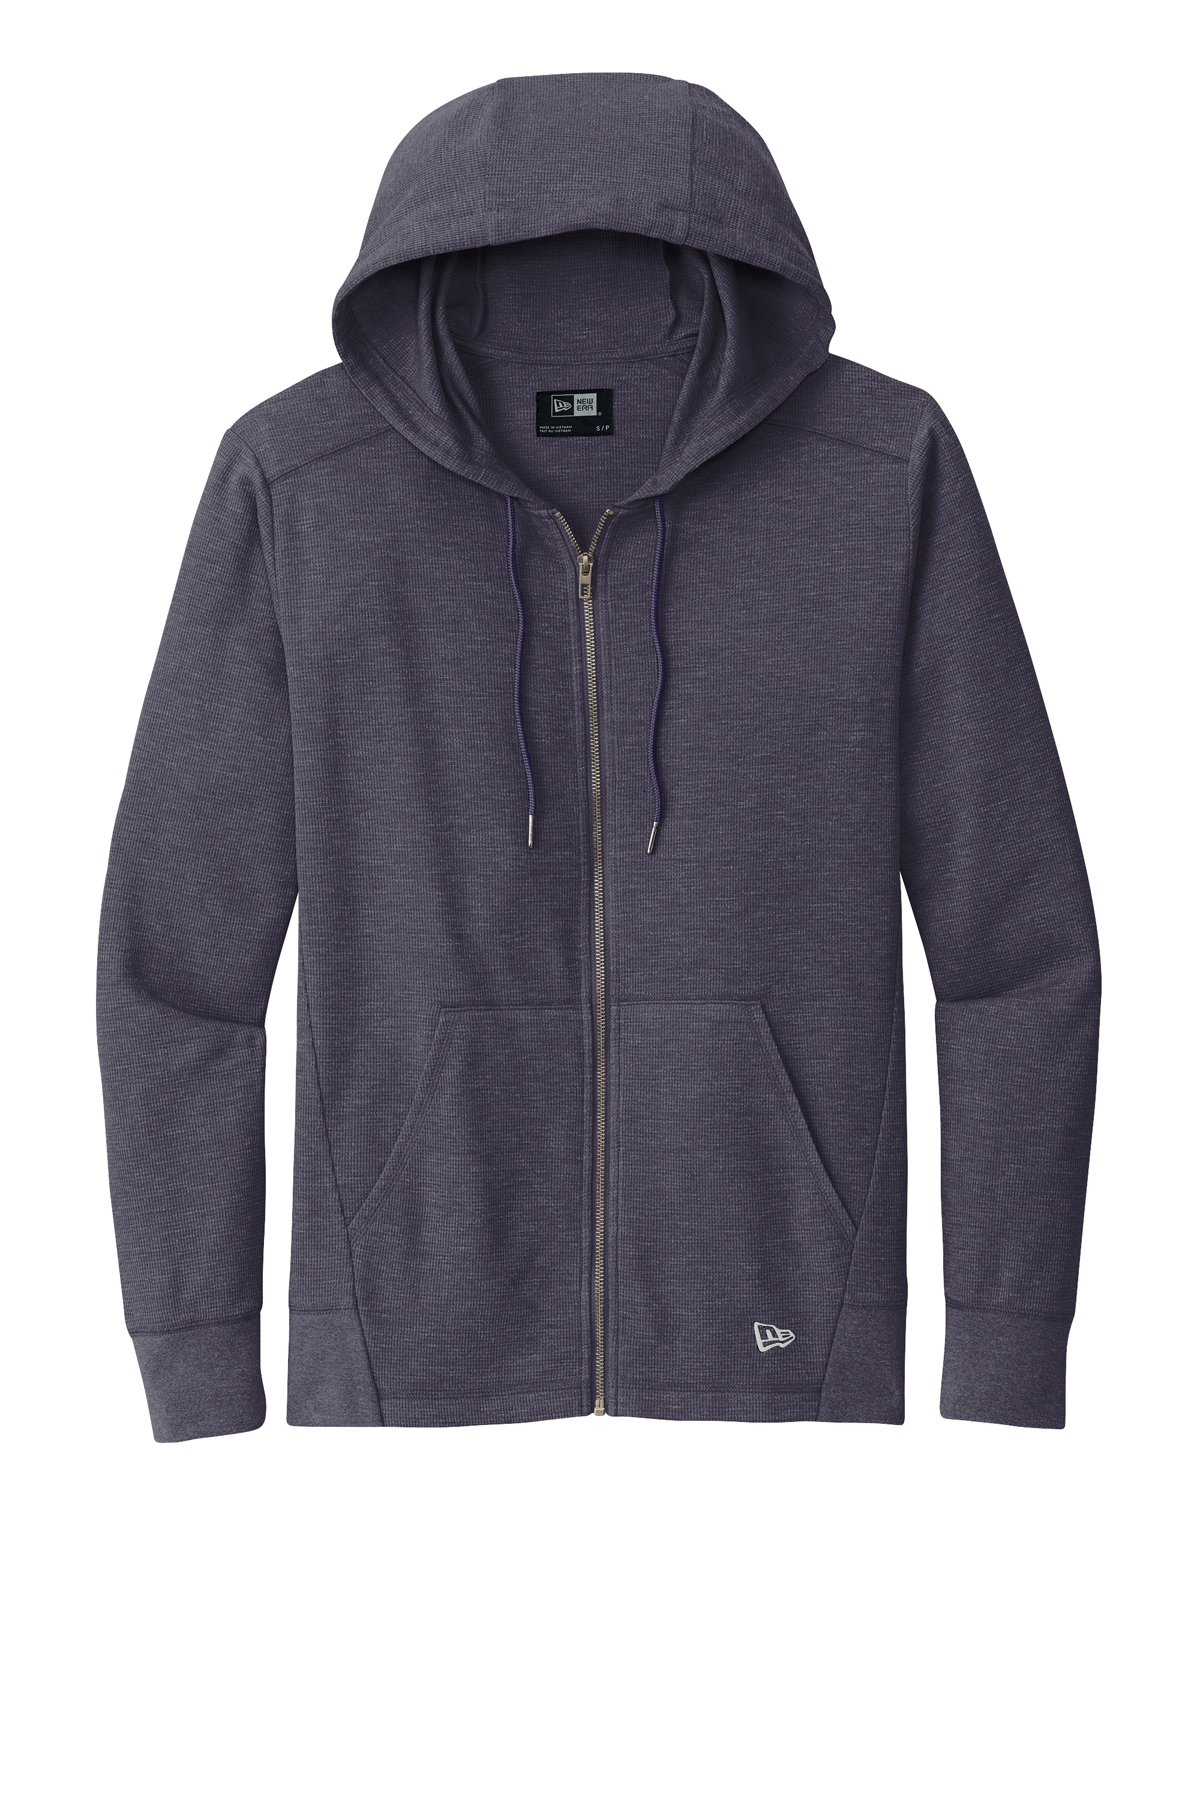 New Era Thermal Full-Zip Hoodie | Product | Company Casuals